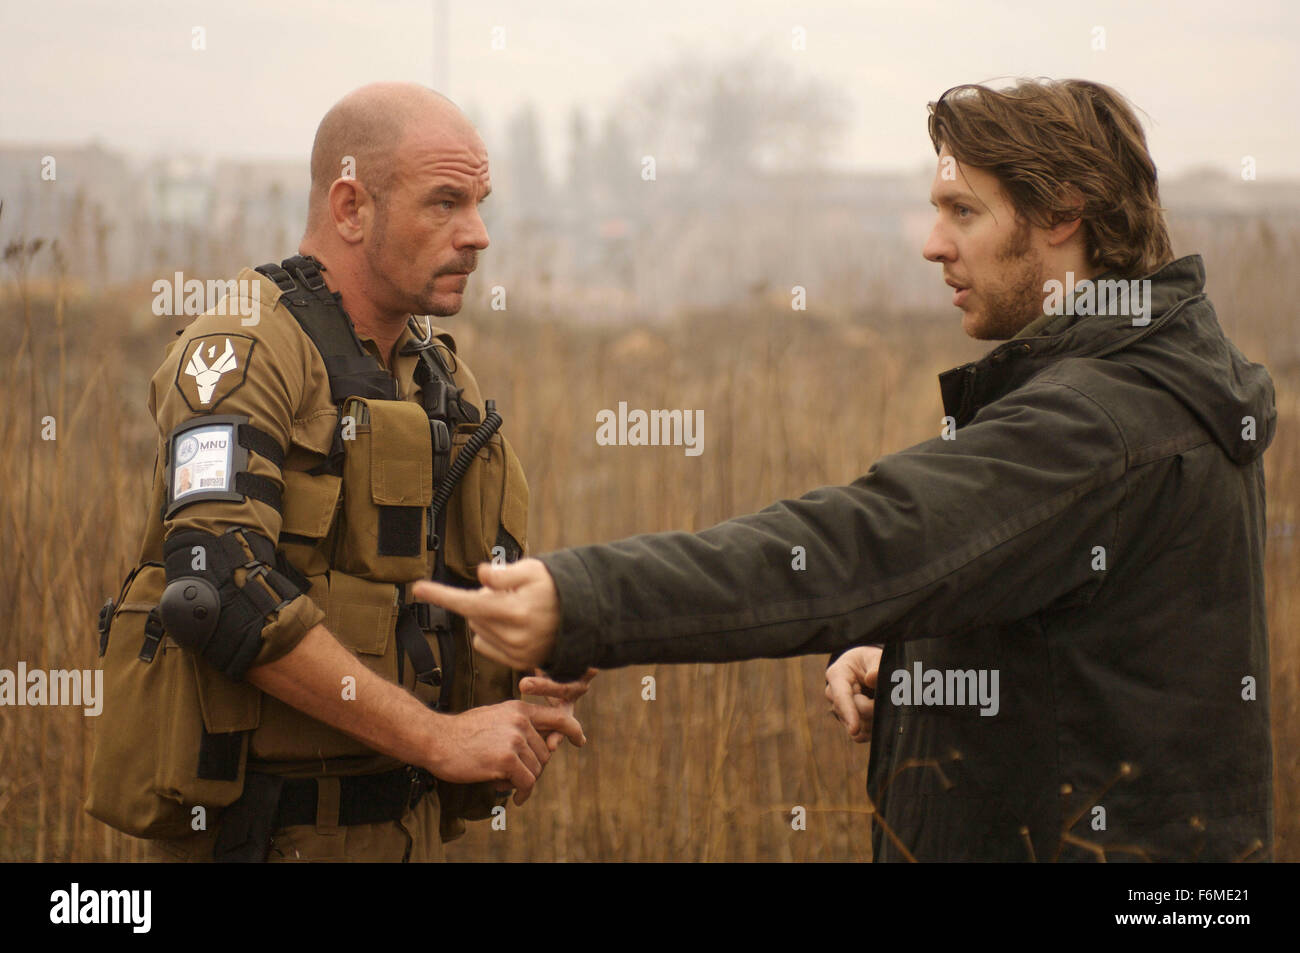 RELEASE DATE: August 19, 2009. MOVIE TITLE: District 9. STUDIO: TriStar Pictures. PLOT: An extraterrestrial race forced to live in slum-like conditions on Earth suddenly finds a kindred spirit in a government agent who is exposed to their biotechnology. PICTURED: DAVID JAMES (left) and Director NEILL BLOMKAMP on the set Stock Photo